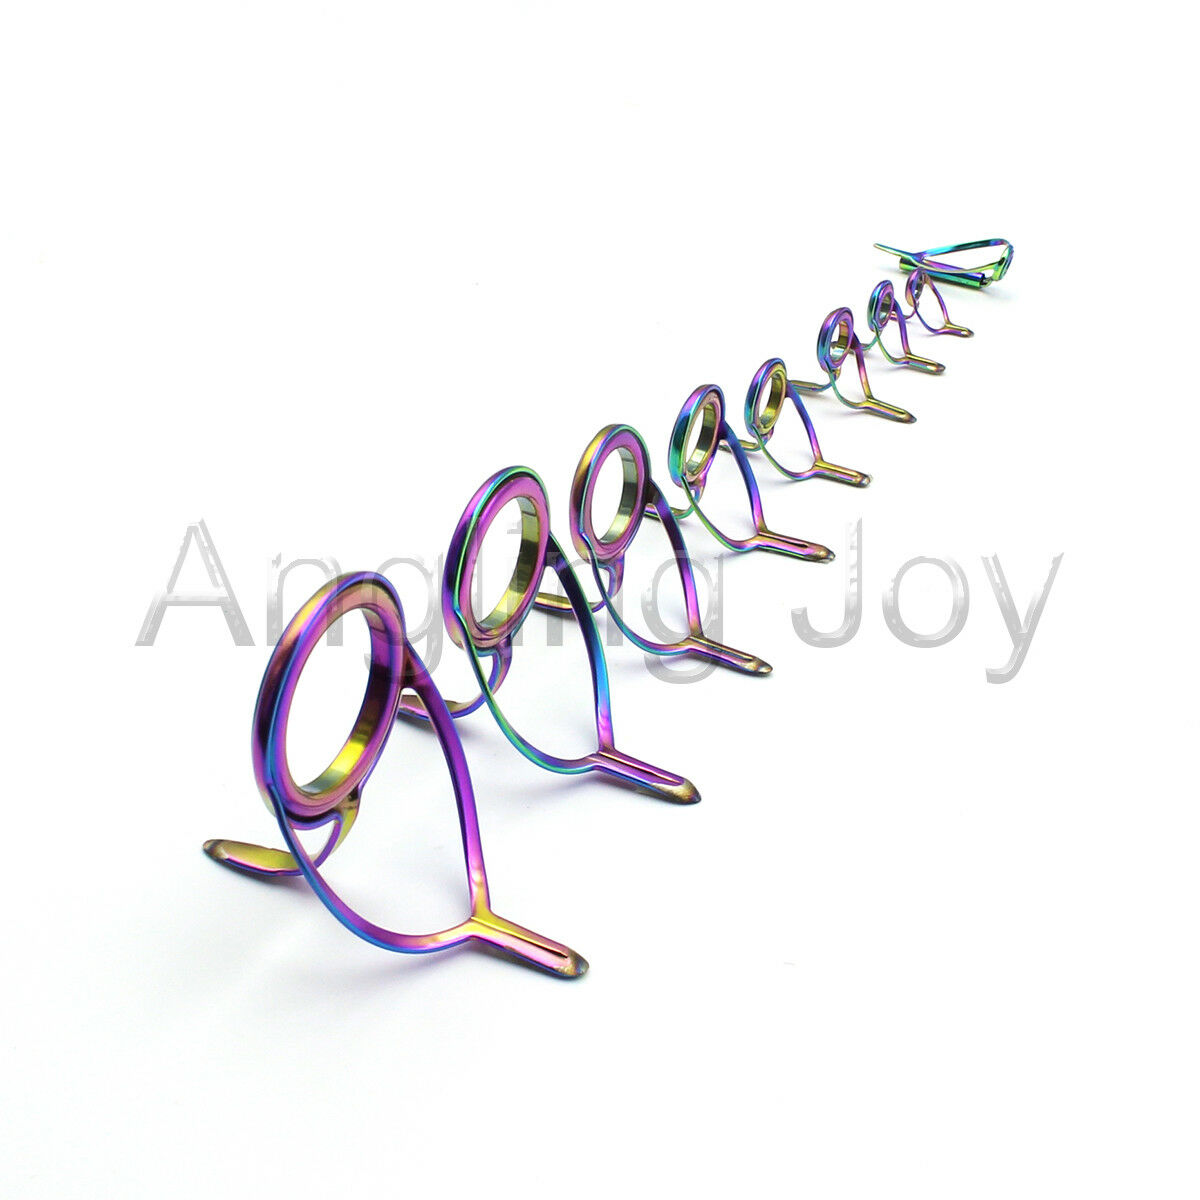 9 Pcs Rainbow Casting Fishing Rod Guides Rod Building And Repair Line Eyelet